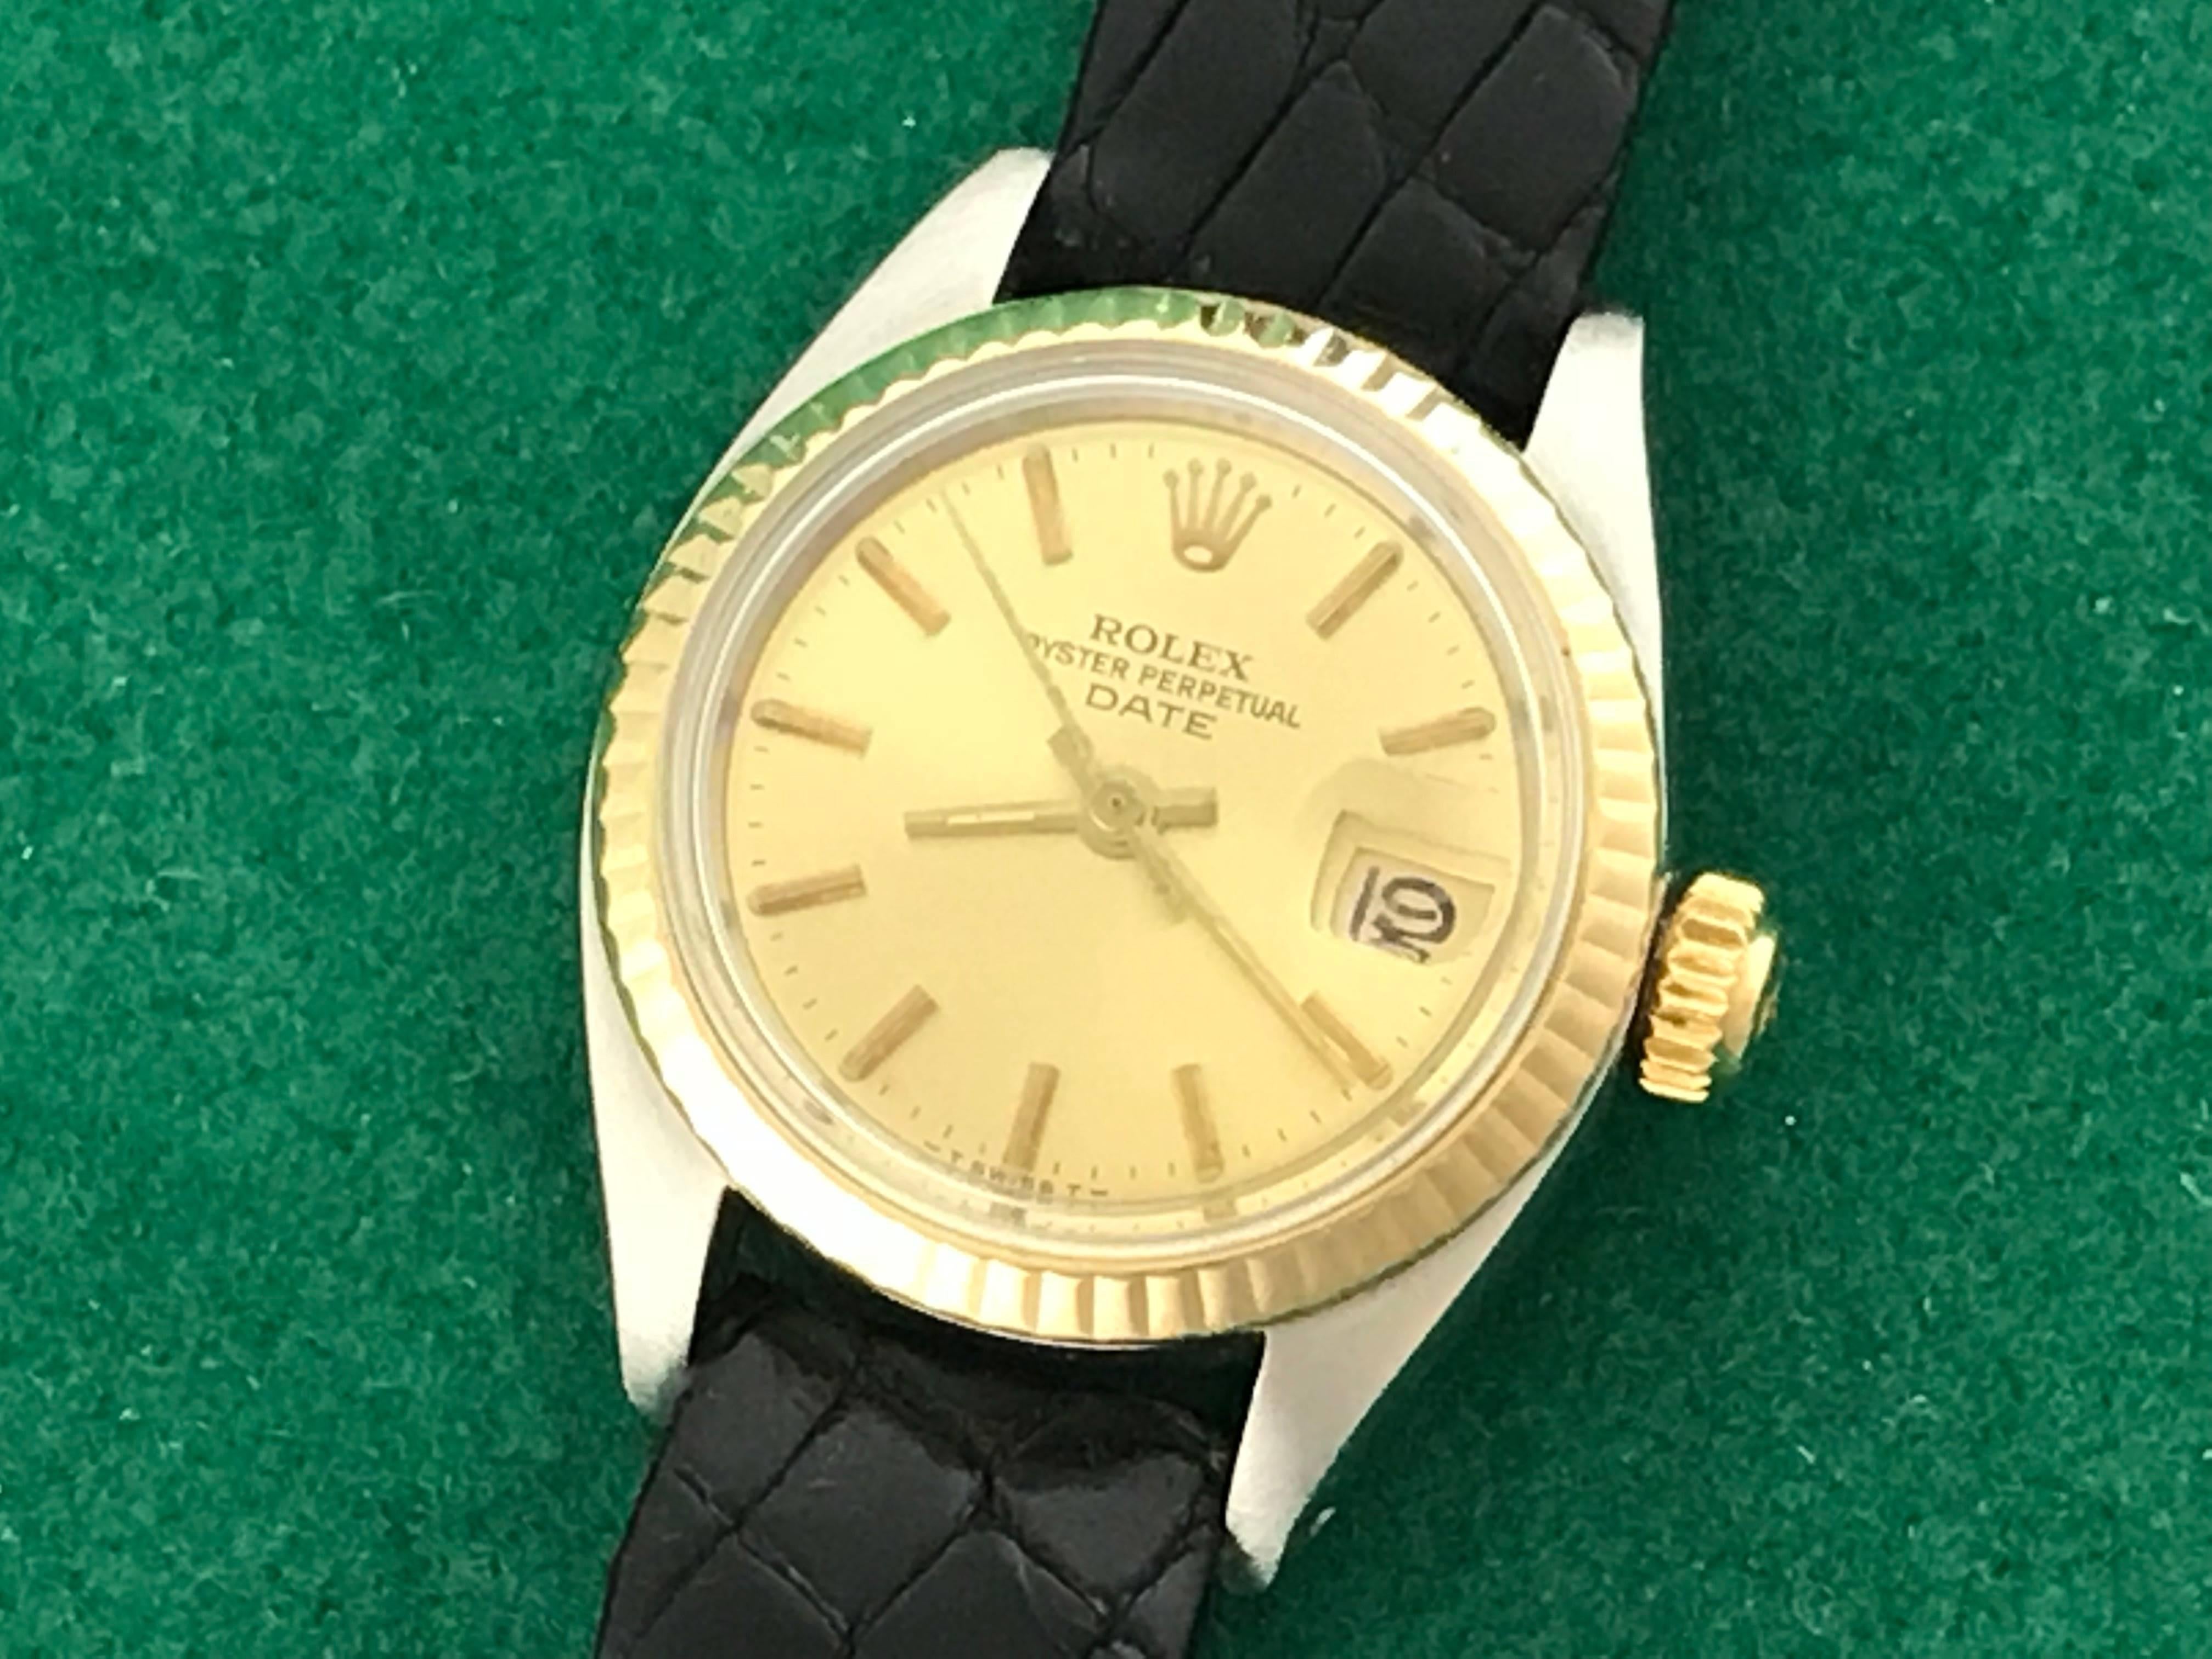 The Rolex Date Model 6917 Ladies automatic wrist watch. Featuring a champagne dial with yellow gold hour markers and stainless steel case with 14k yellow gold fluted bezel. Measures 25mm. Comes with a black alligator strap, box, instruction booklet